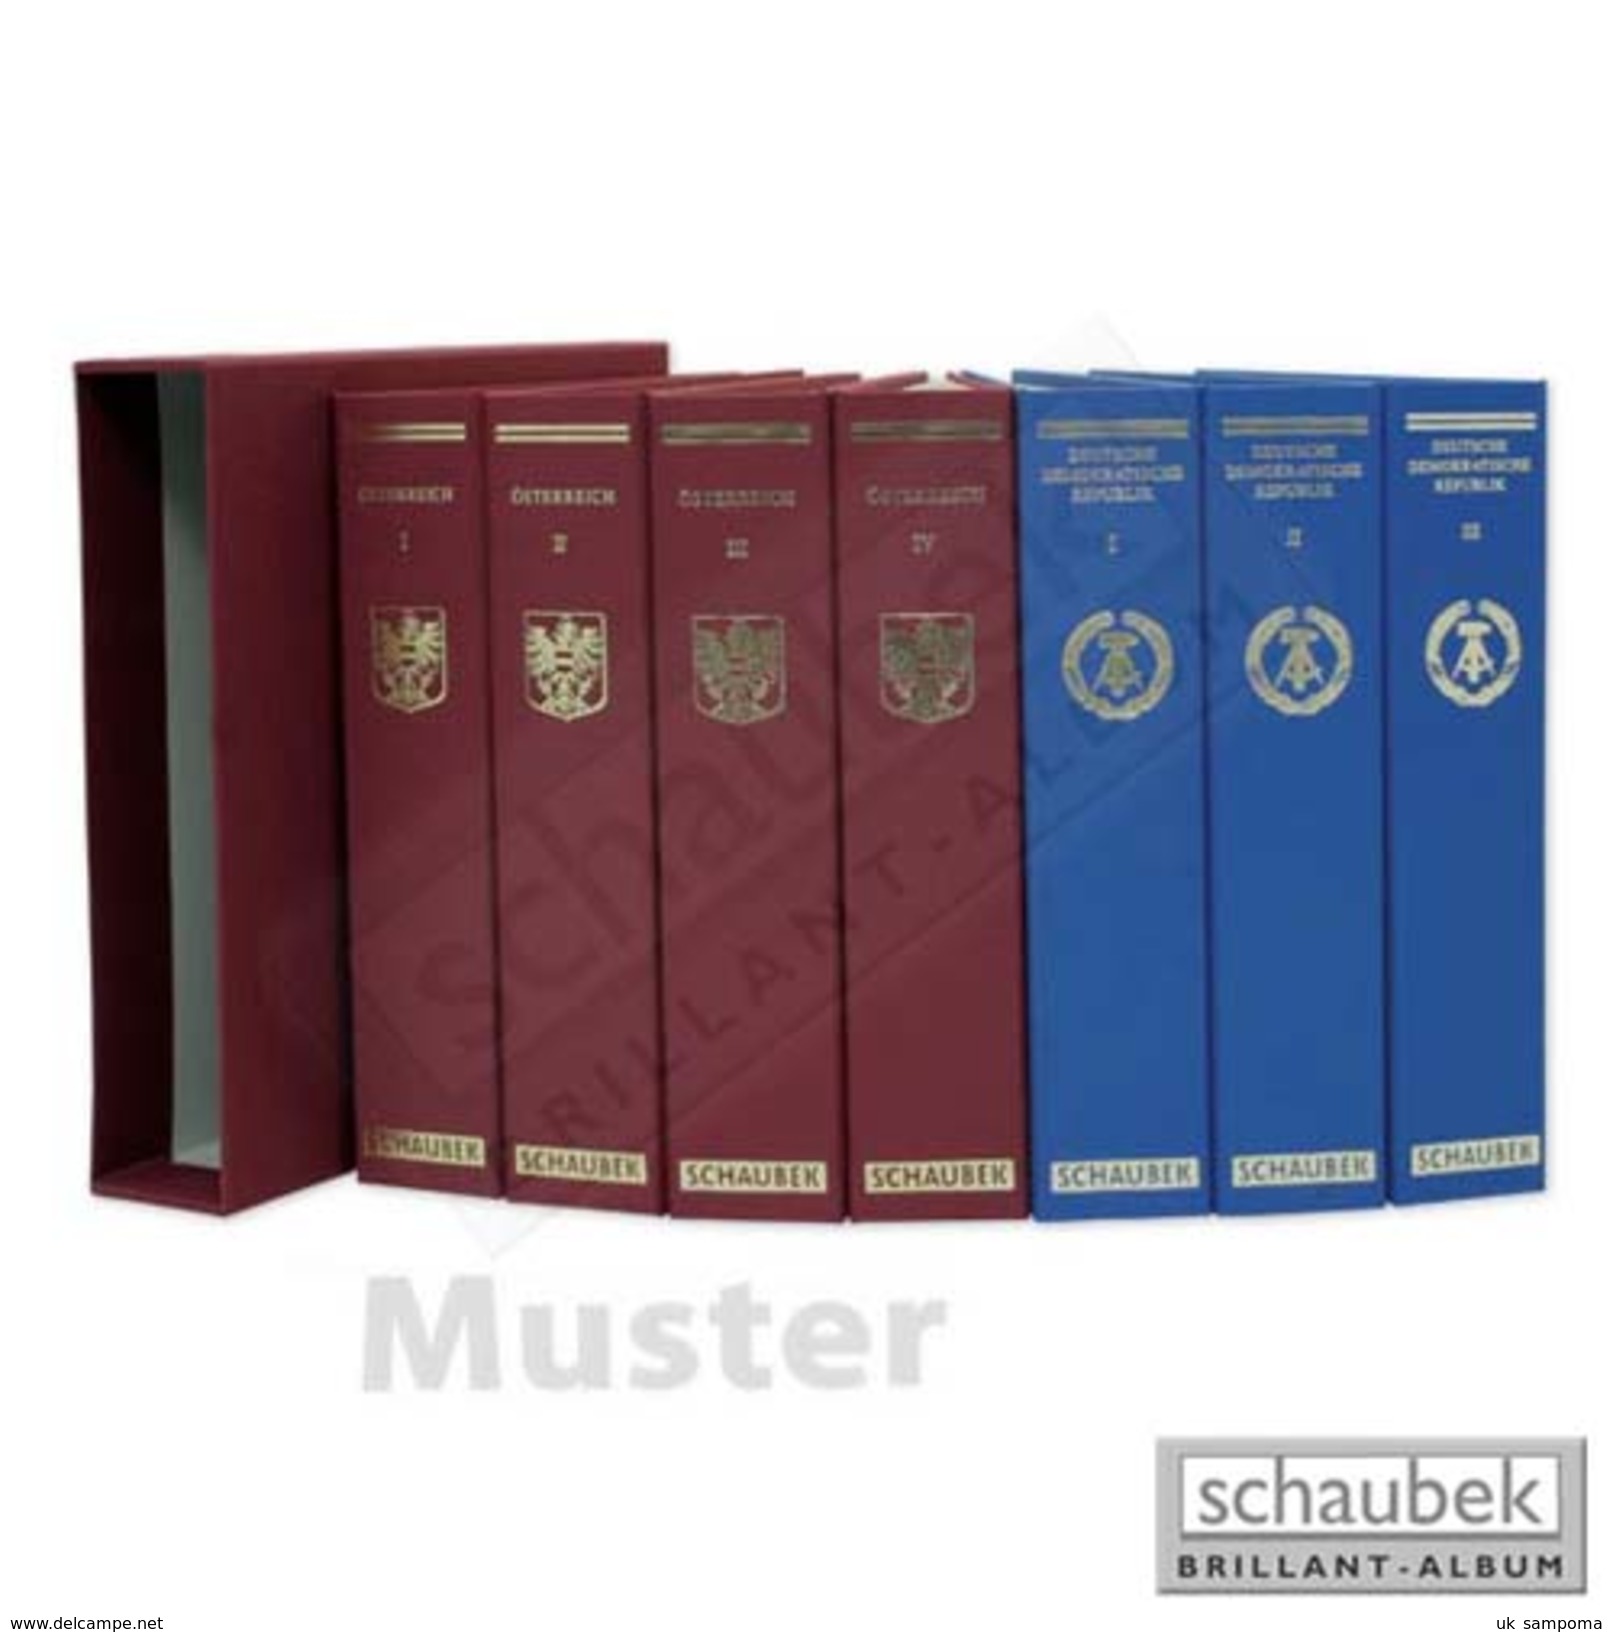 Schaubek A-803/03N Album Luxembourg 2002-2014 Standard, In A Blue Screw Post Binder, Vol. III Without Slipcase - Binders With Pages